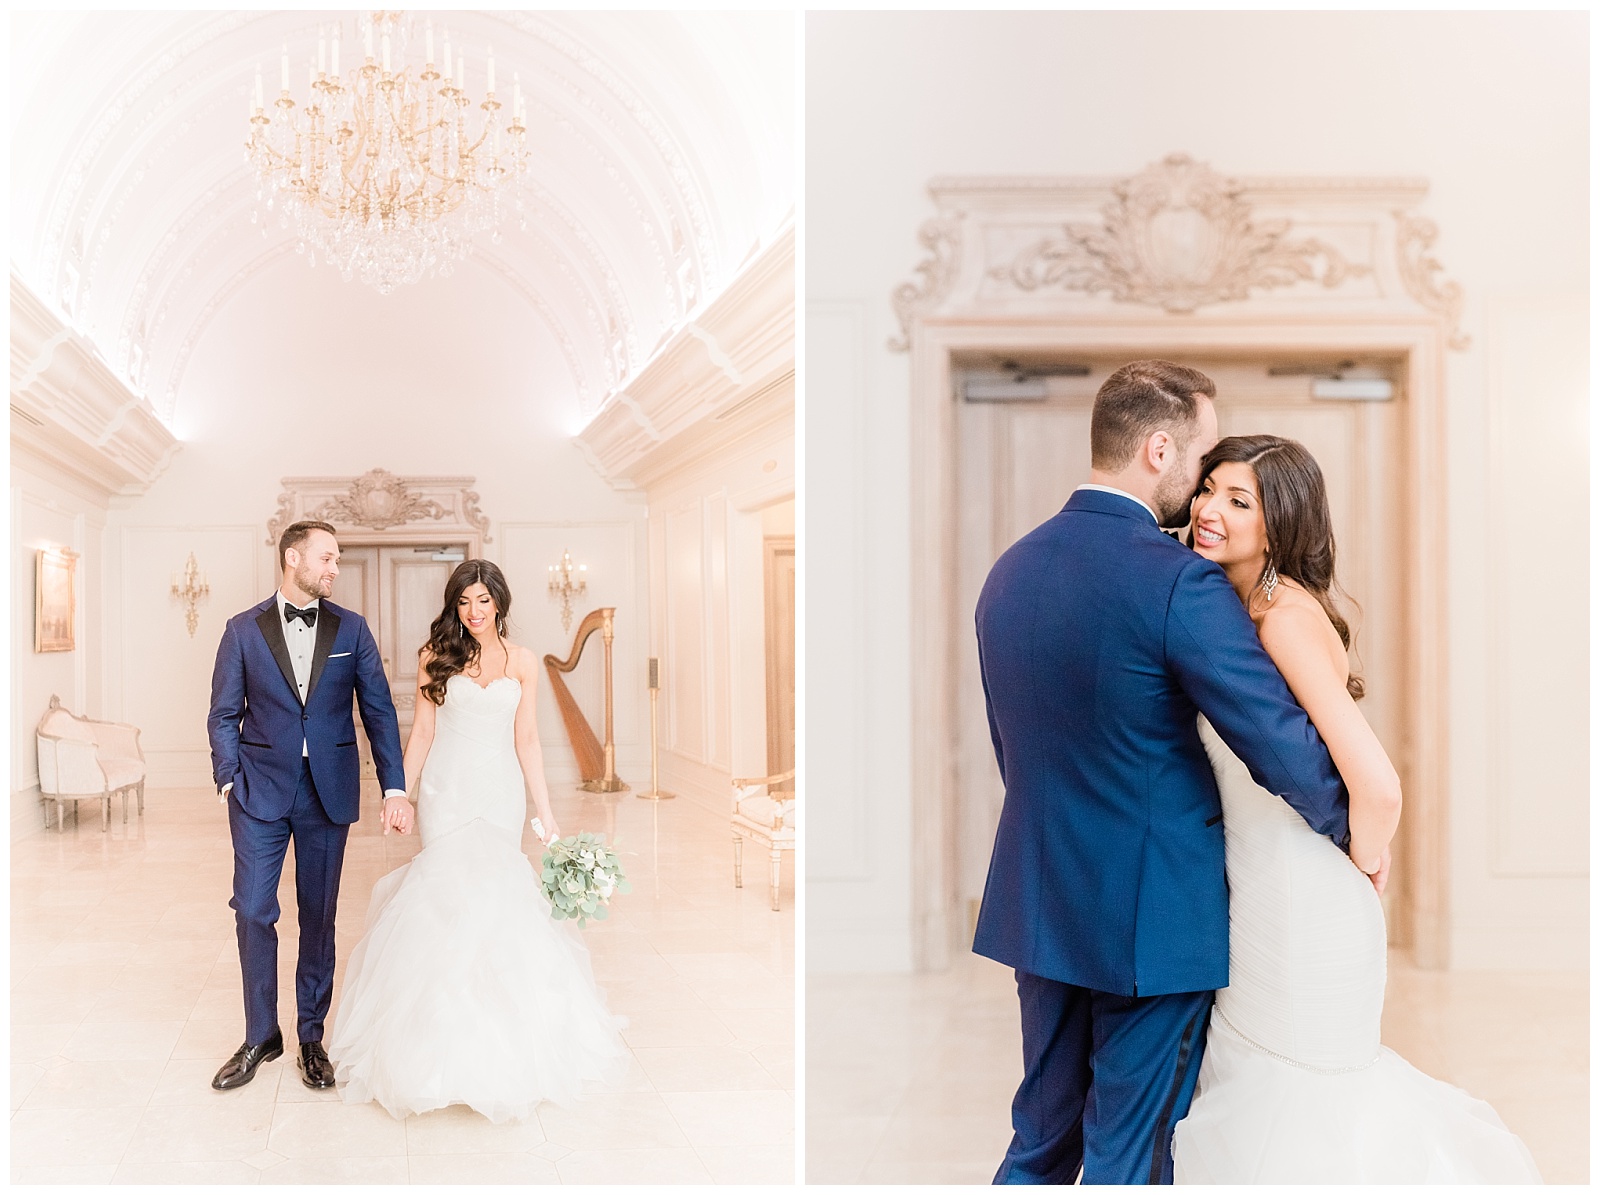 Park Chateau Wedding, Photographer, New Jersey, NJ, Winter, Bride and Groom Portraits, Light and Airy, Indoor, Elegant